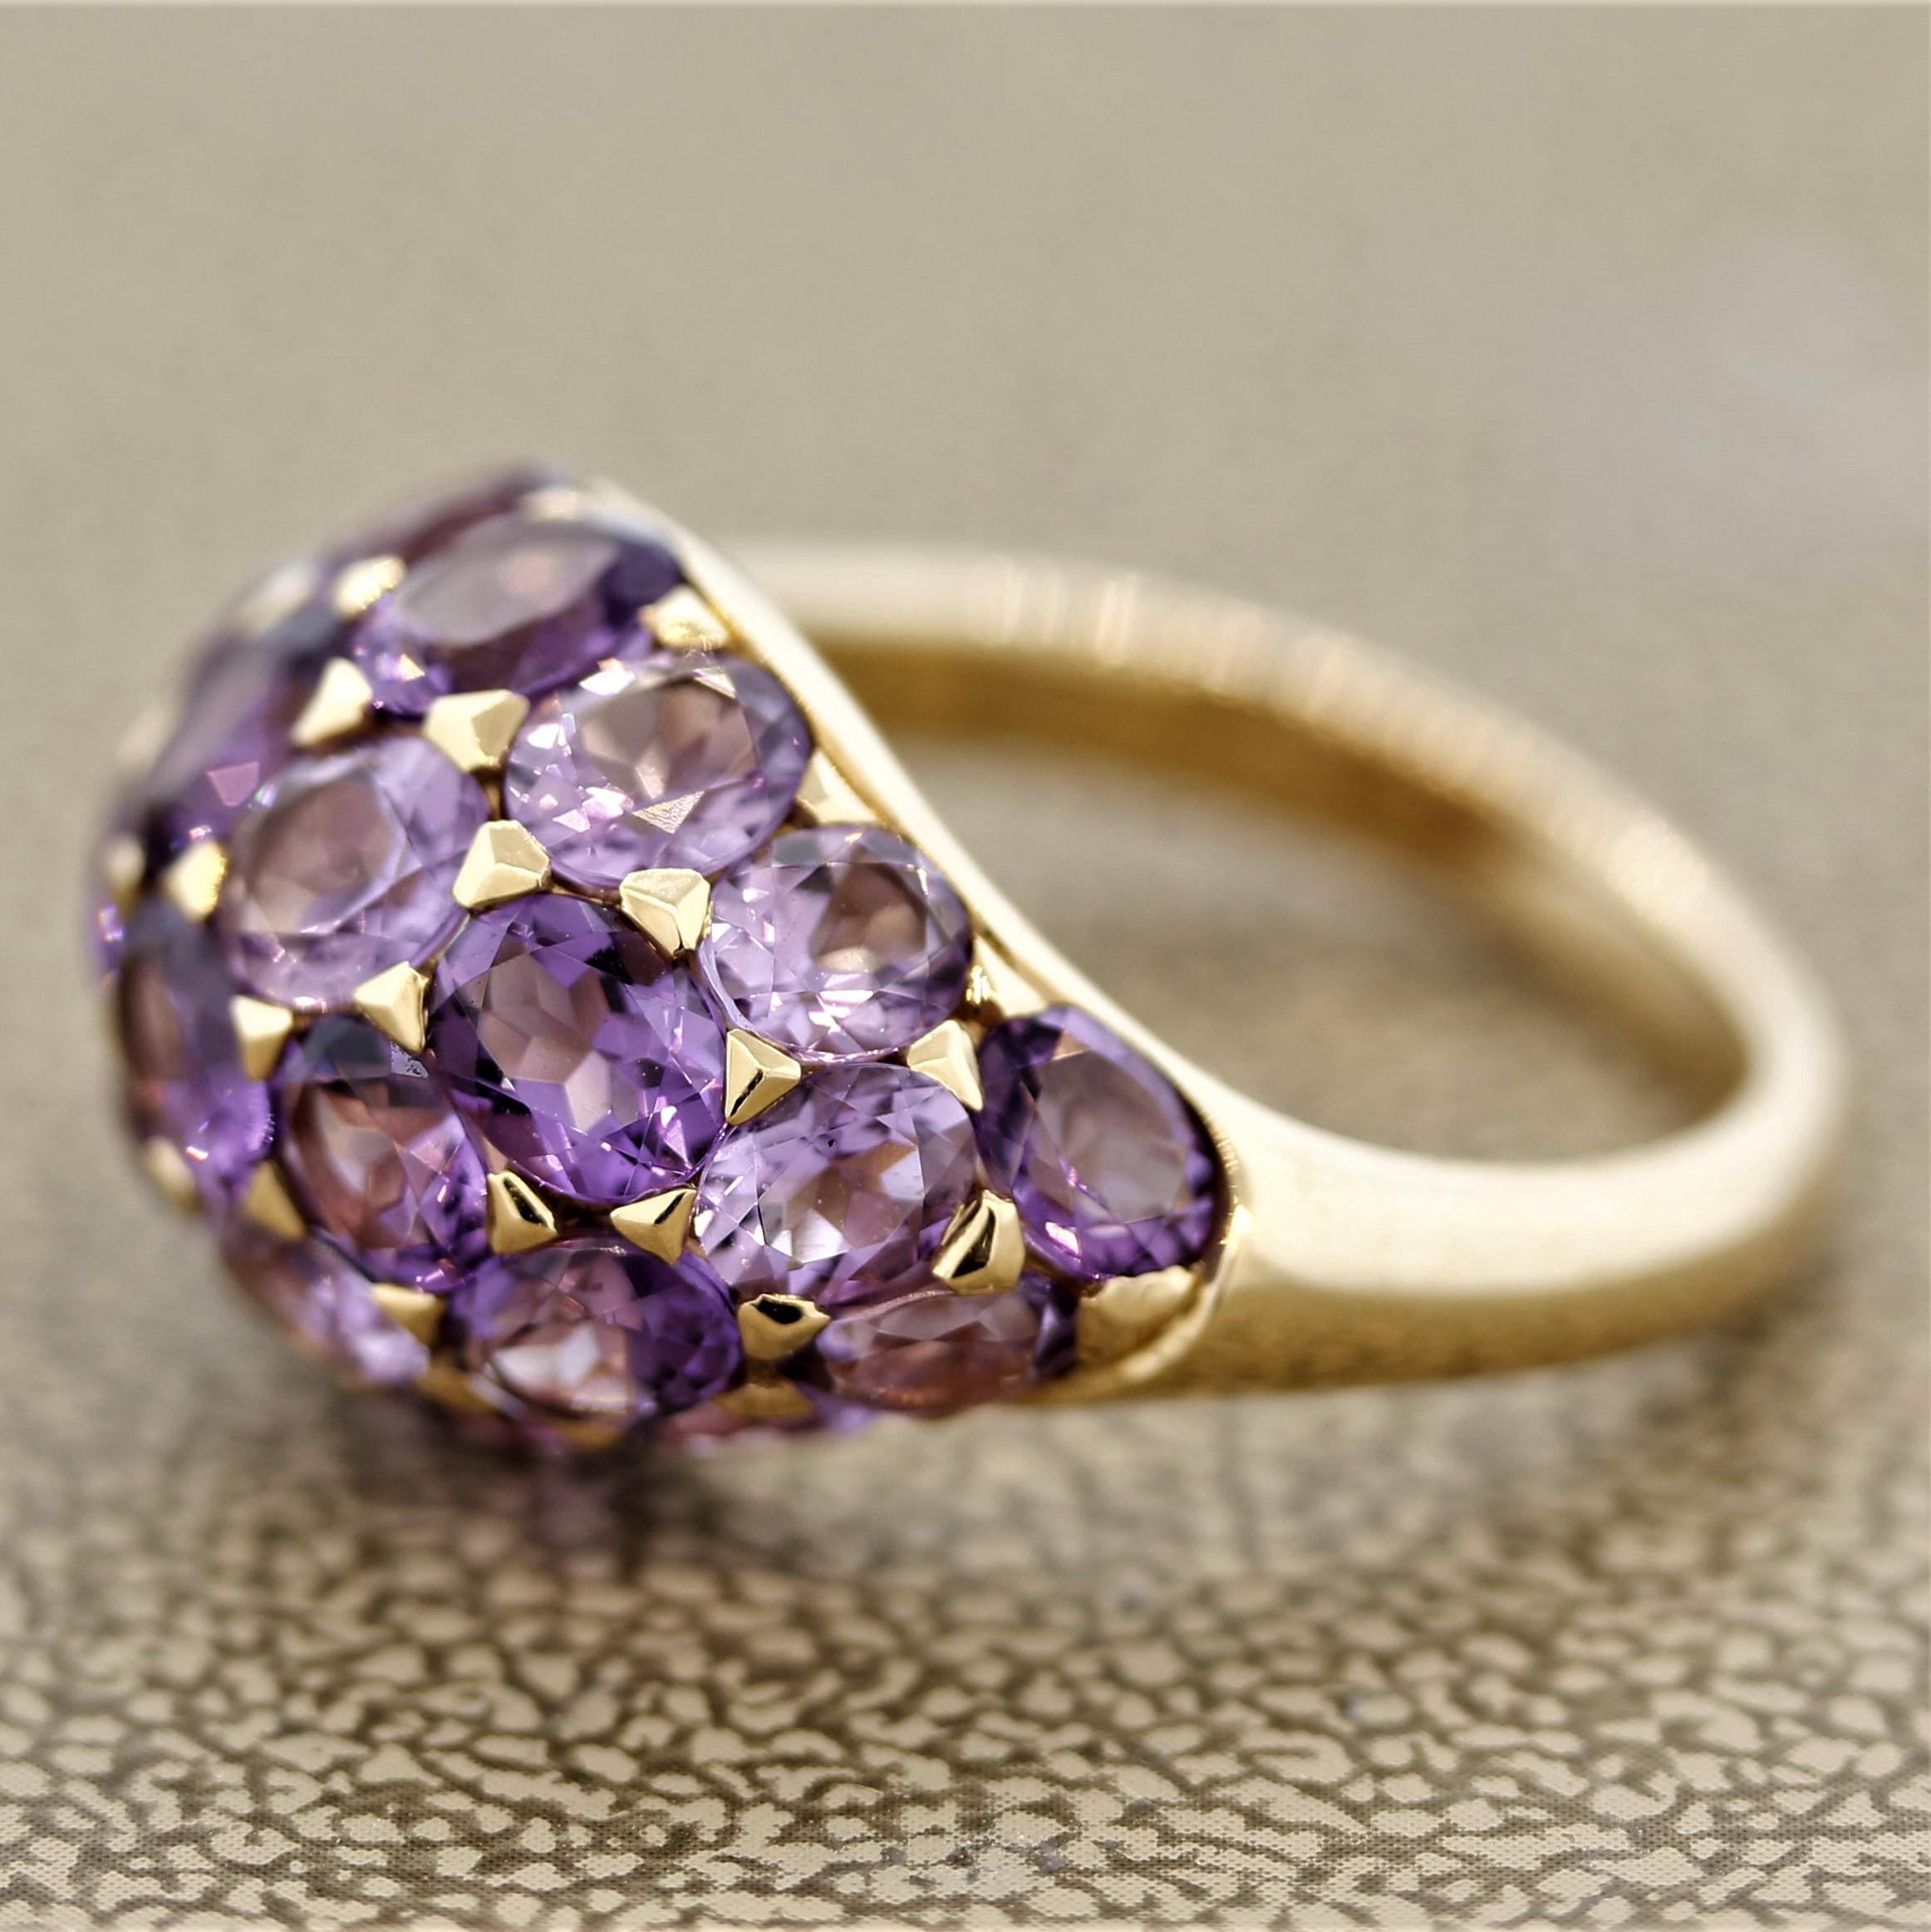 A sweet domed ring featuring bright purple amethyst! They are cut as oval shapes in various sizes and weigh a total of 5.24 carats. Set in 18k rose gold and ready to be worn.

Ring Size 6.25